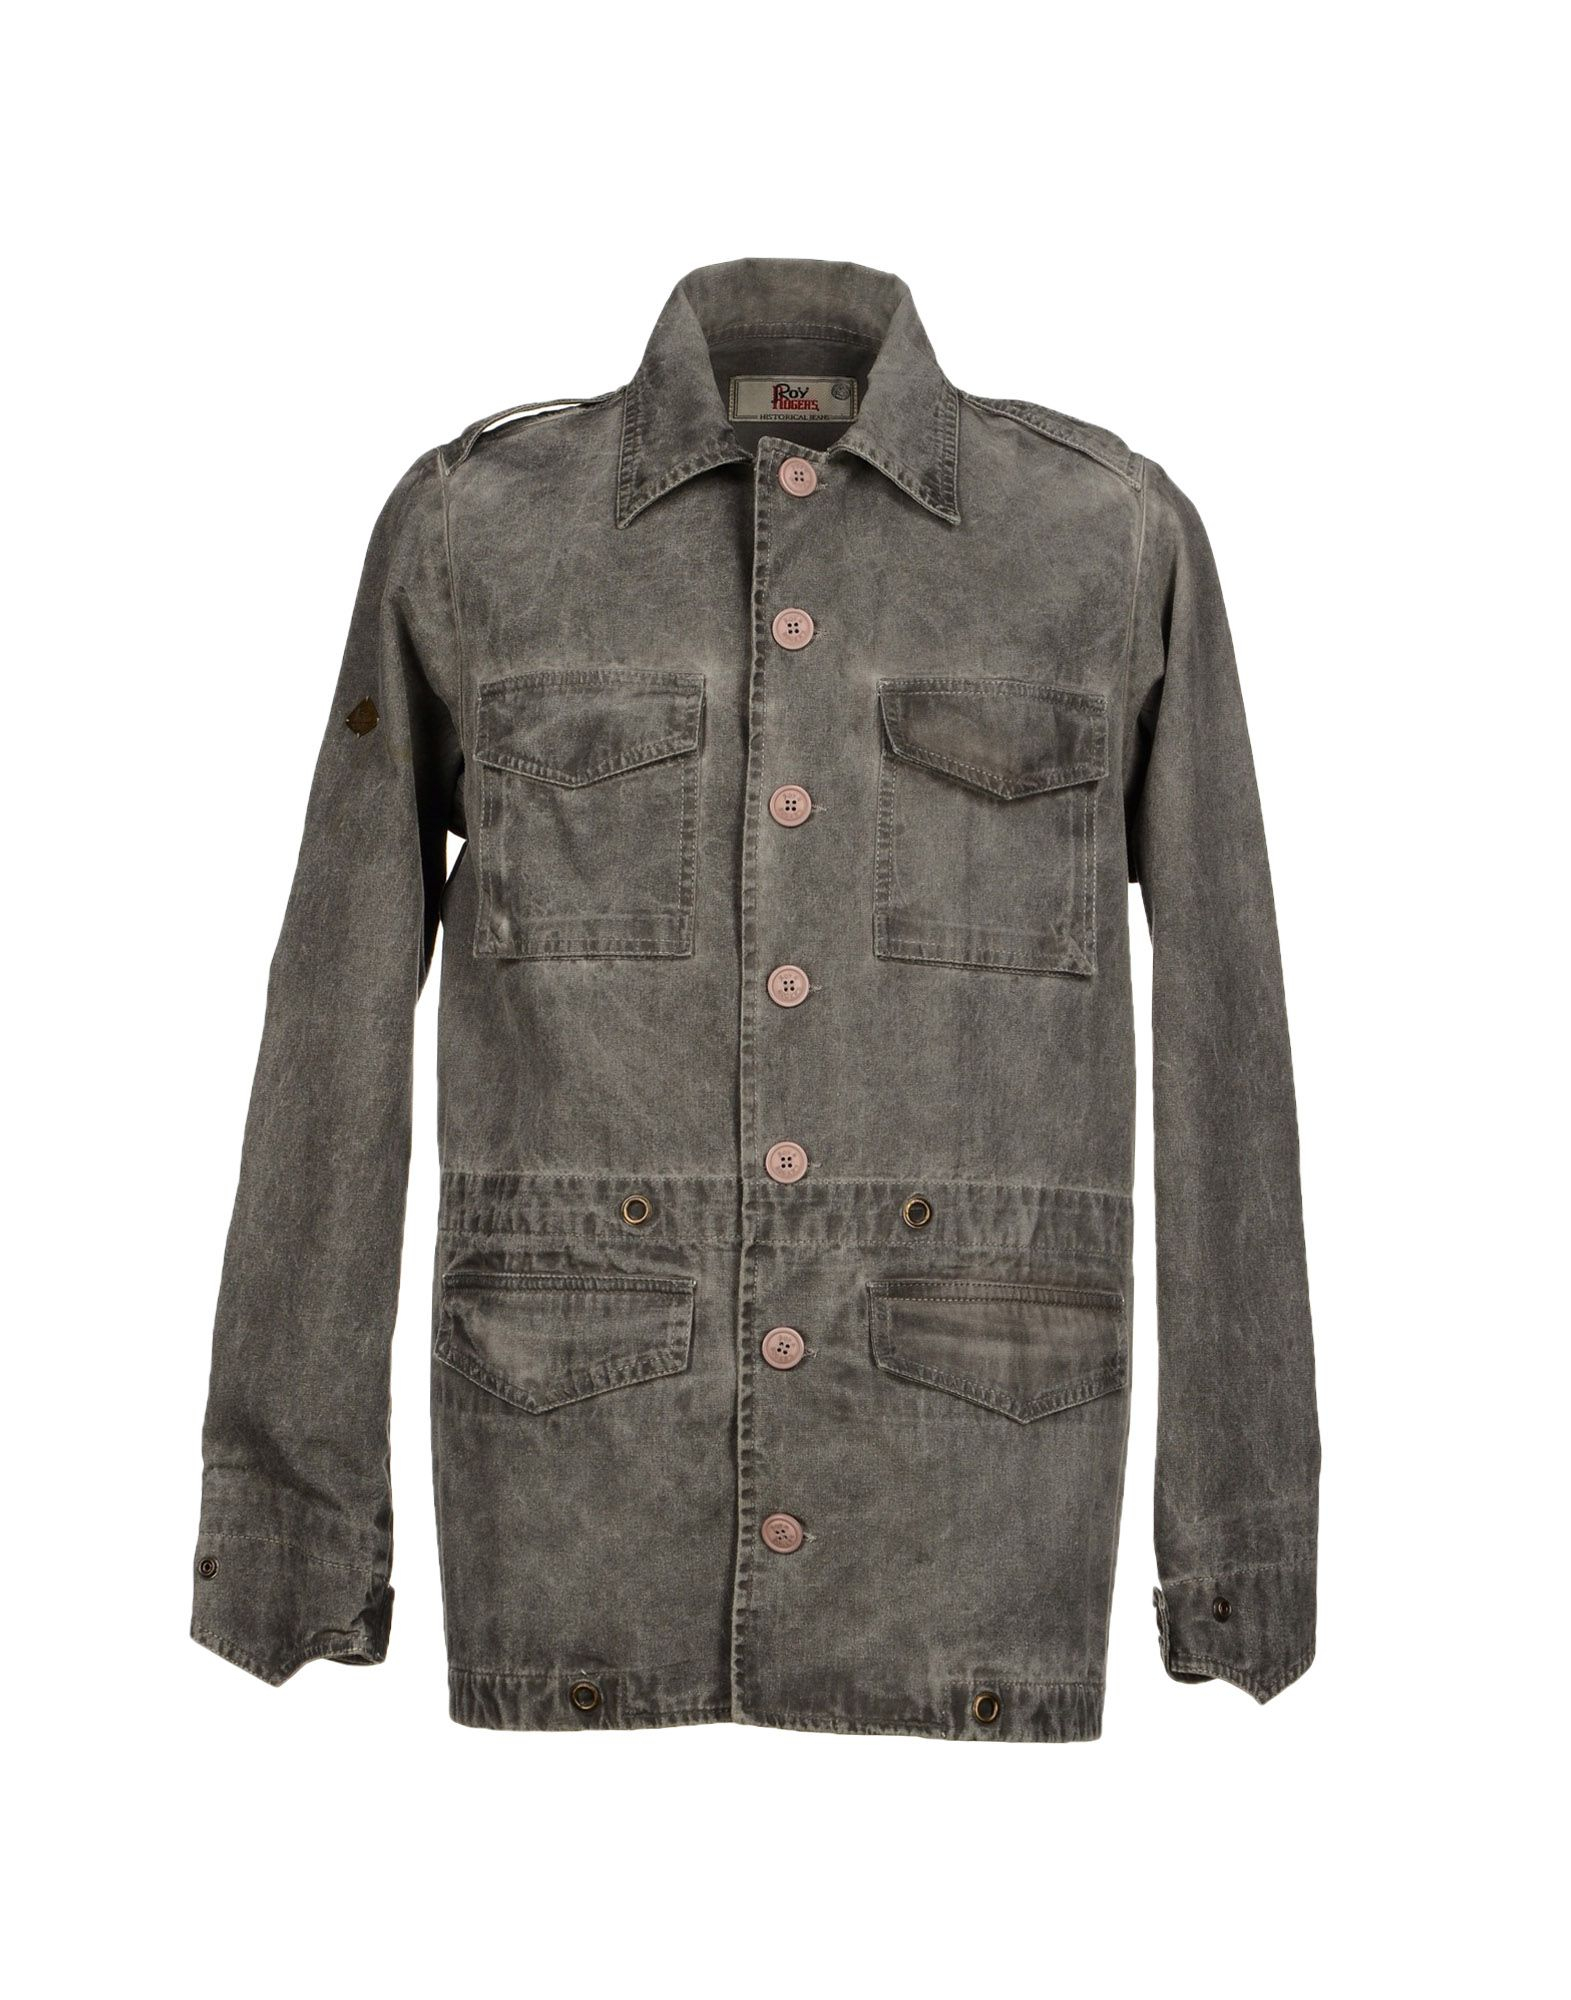 Lyst - Roy Rogers Jacket in Gray for Men